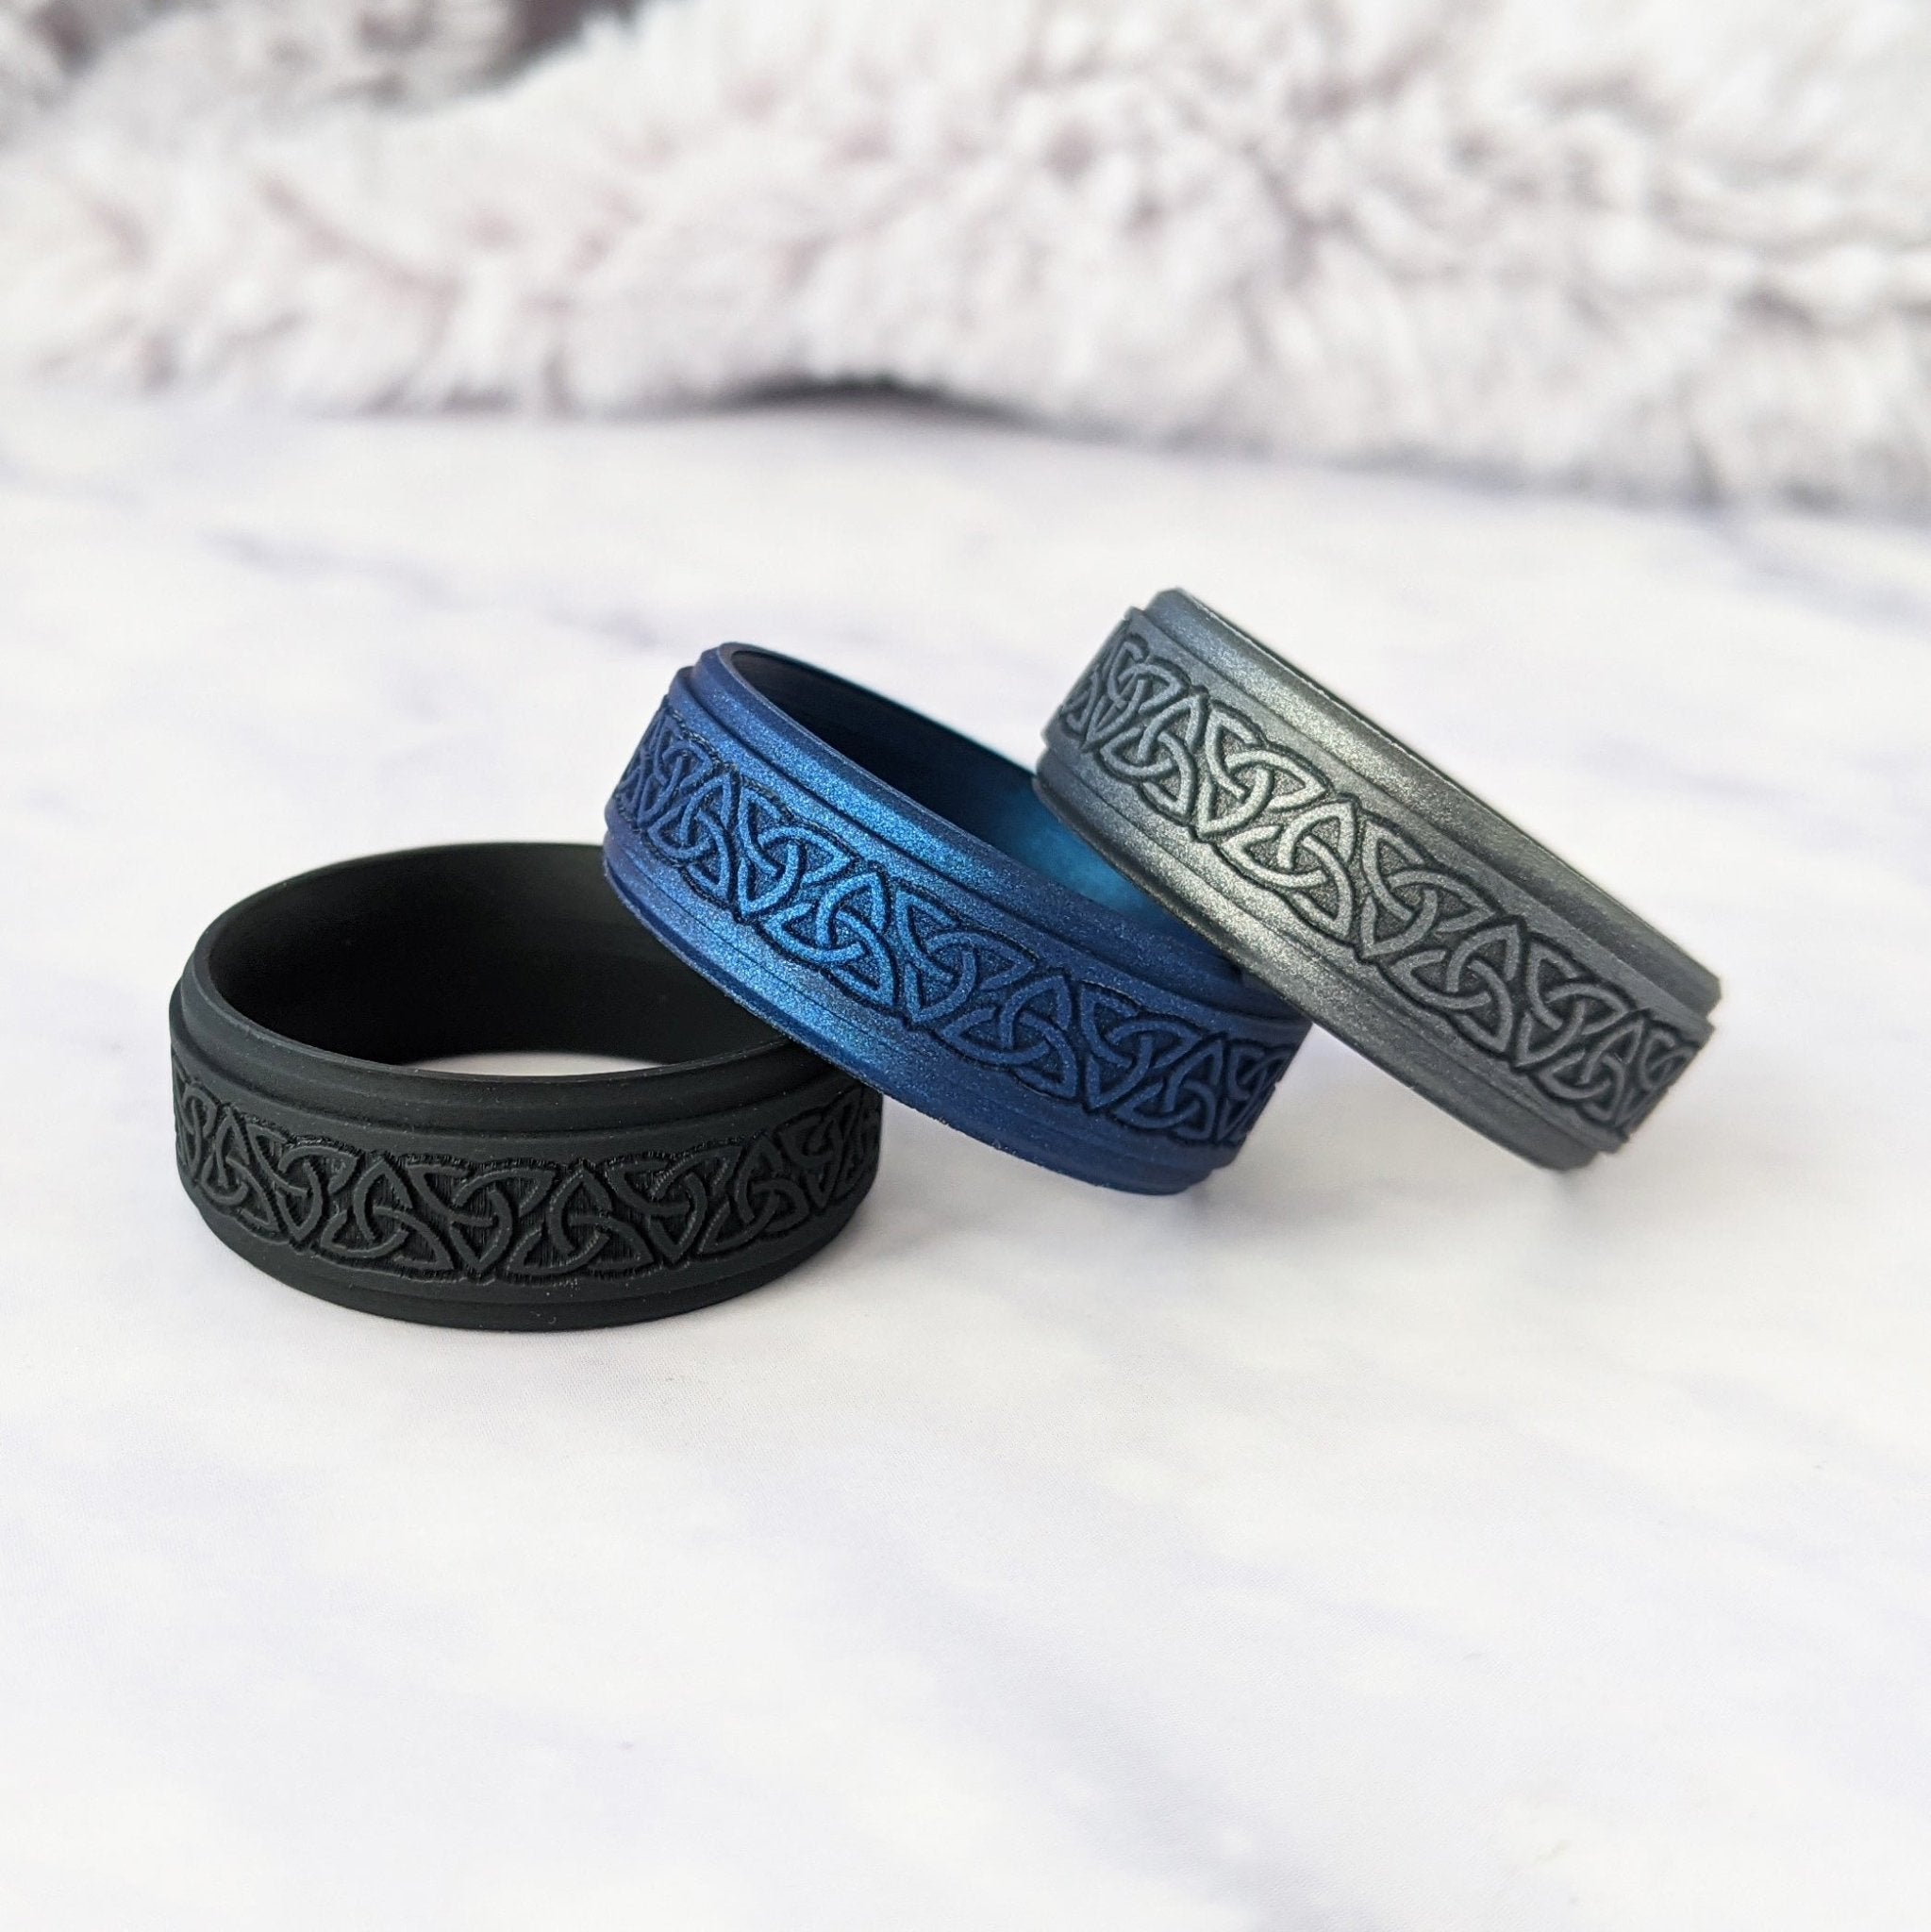 Trinity Knot Silicone Ring for Men - Custom Engraved in Black, Dark Silver, Metal Blue, or Metal Teal